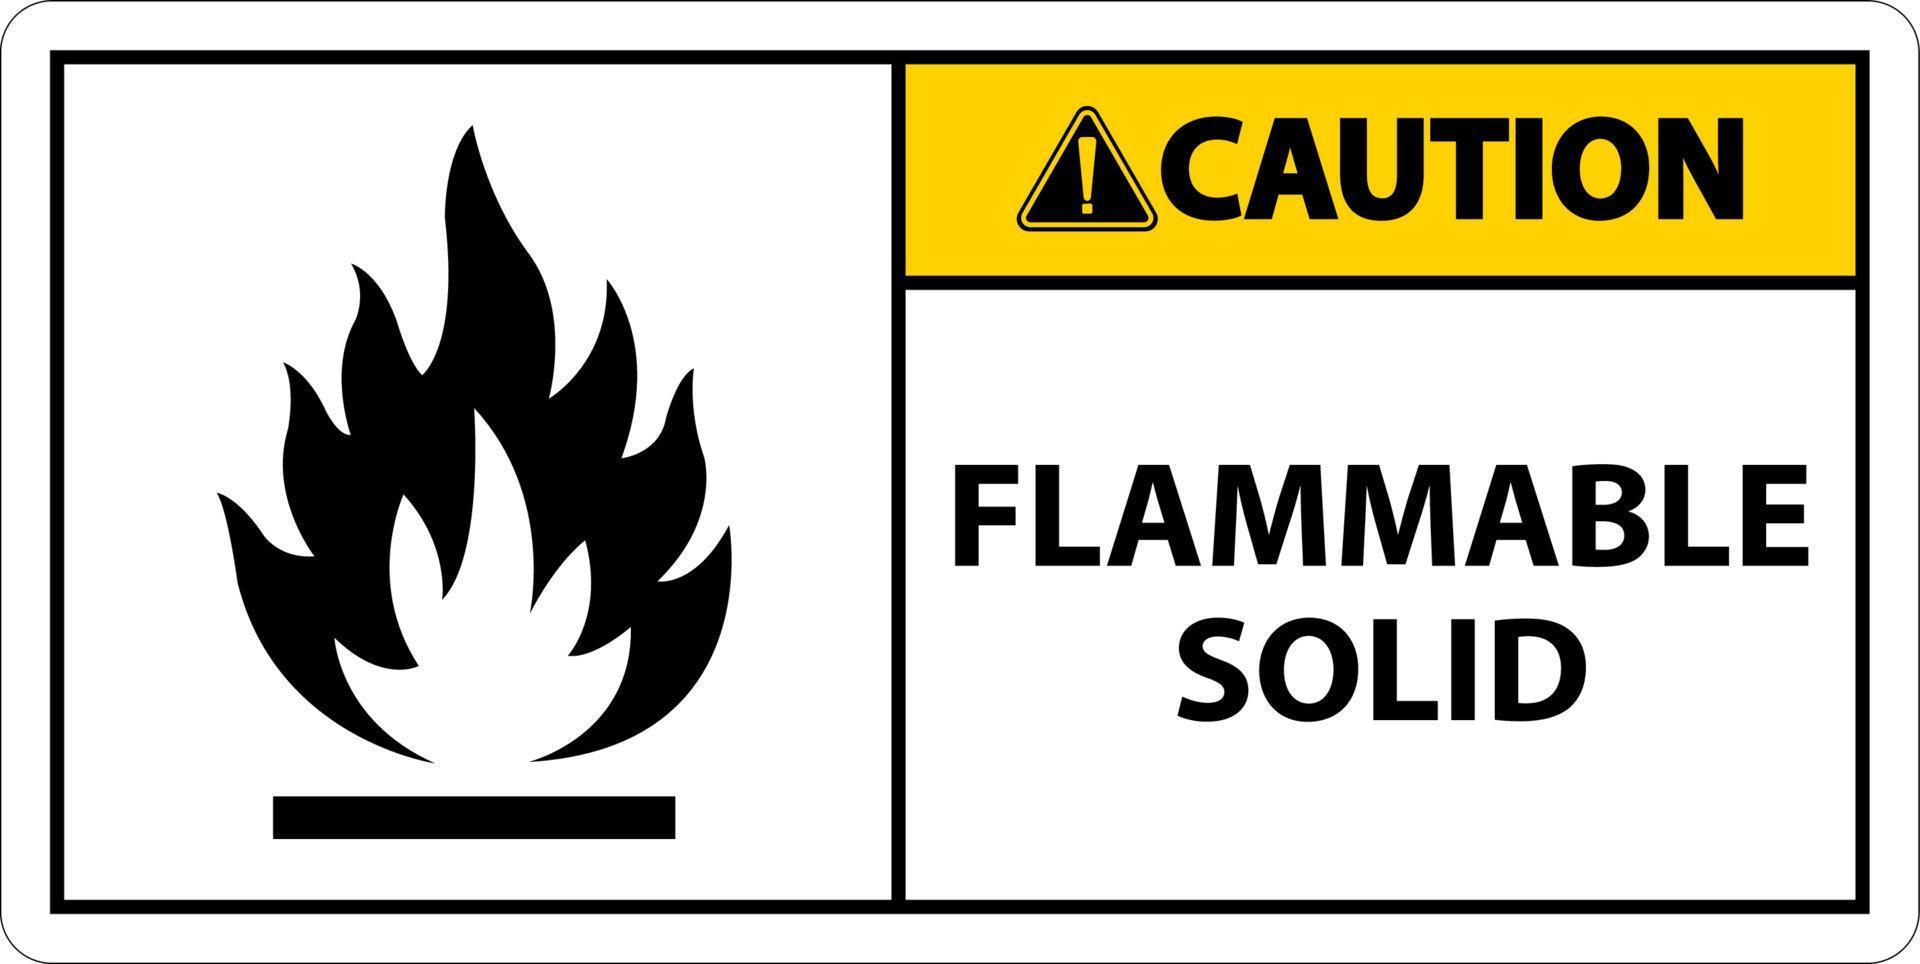 Caution Hazardous Signs Flammable Solid On White Background vector